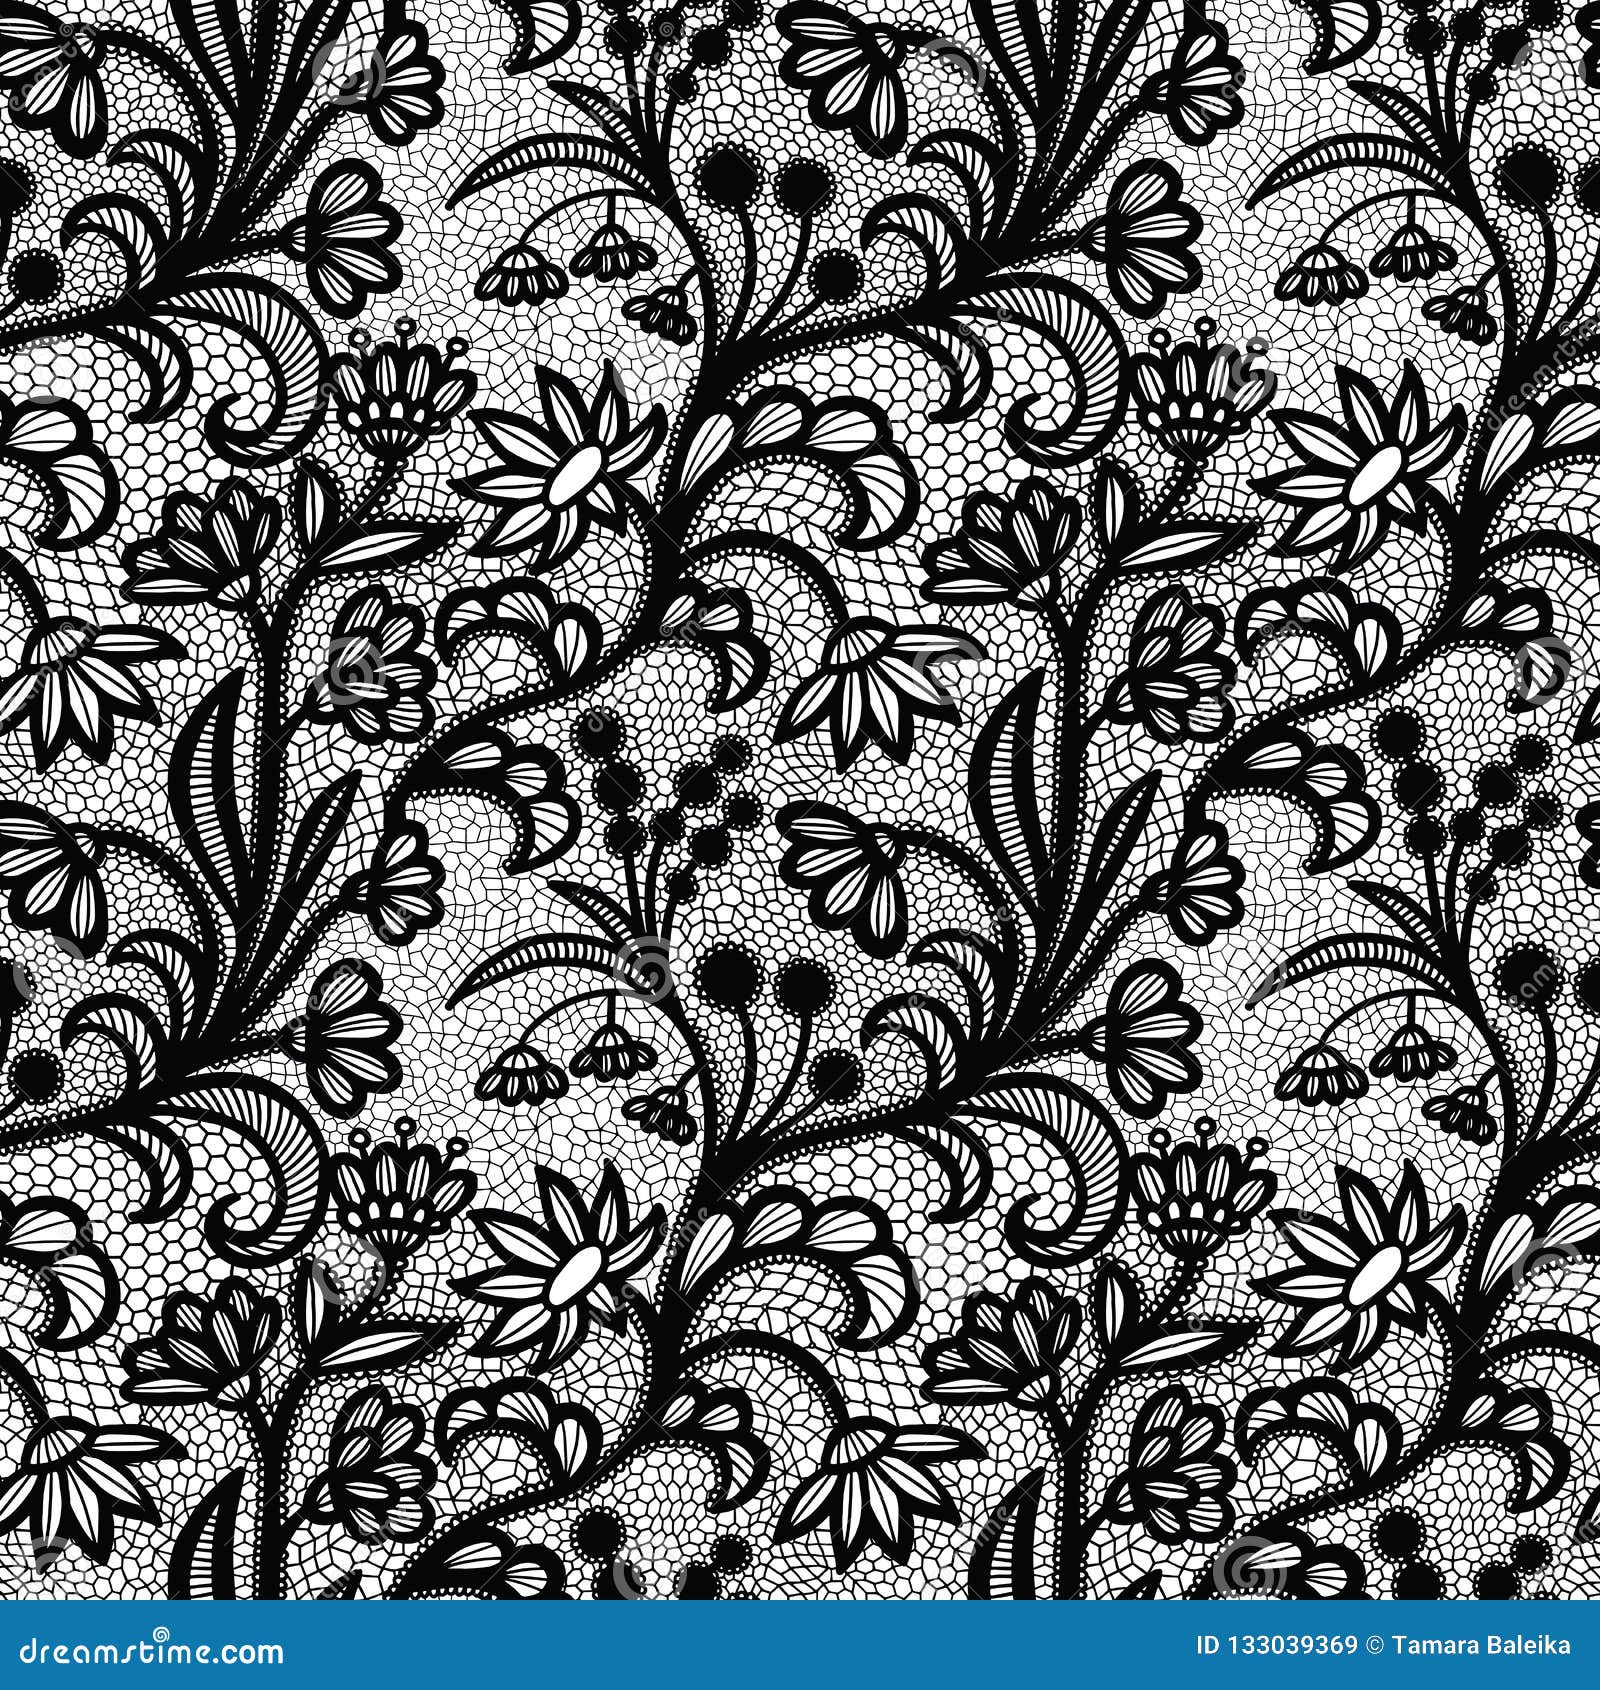 Black Vintage Lace Seamless Pattern with Flowers Stock Vector ...